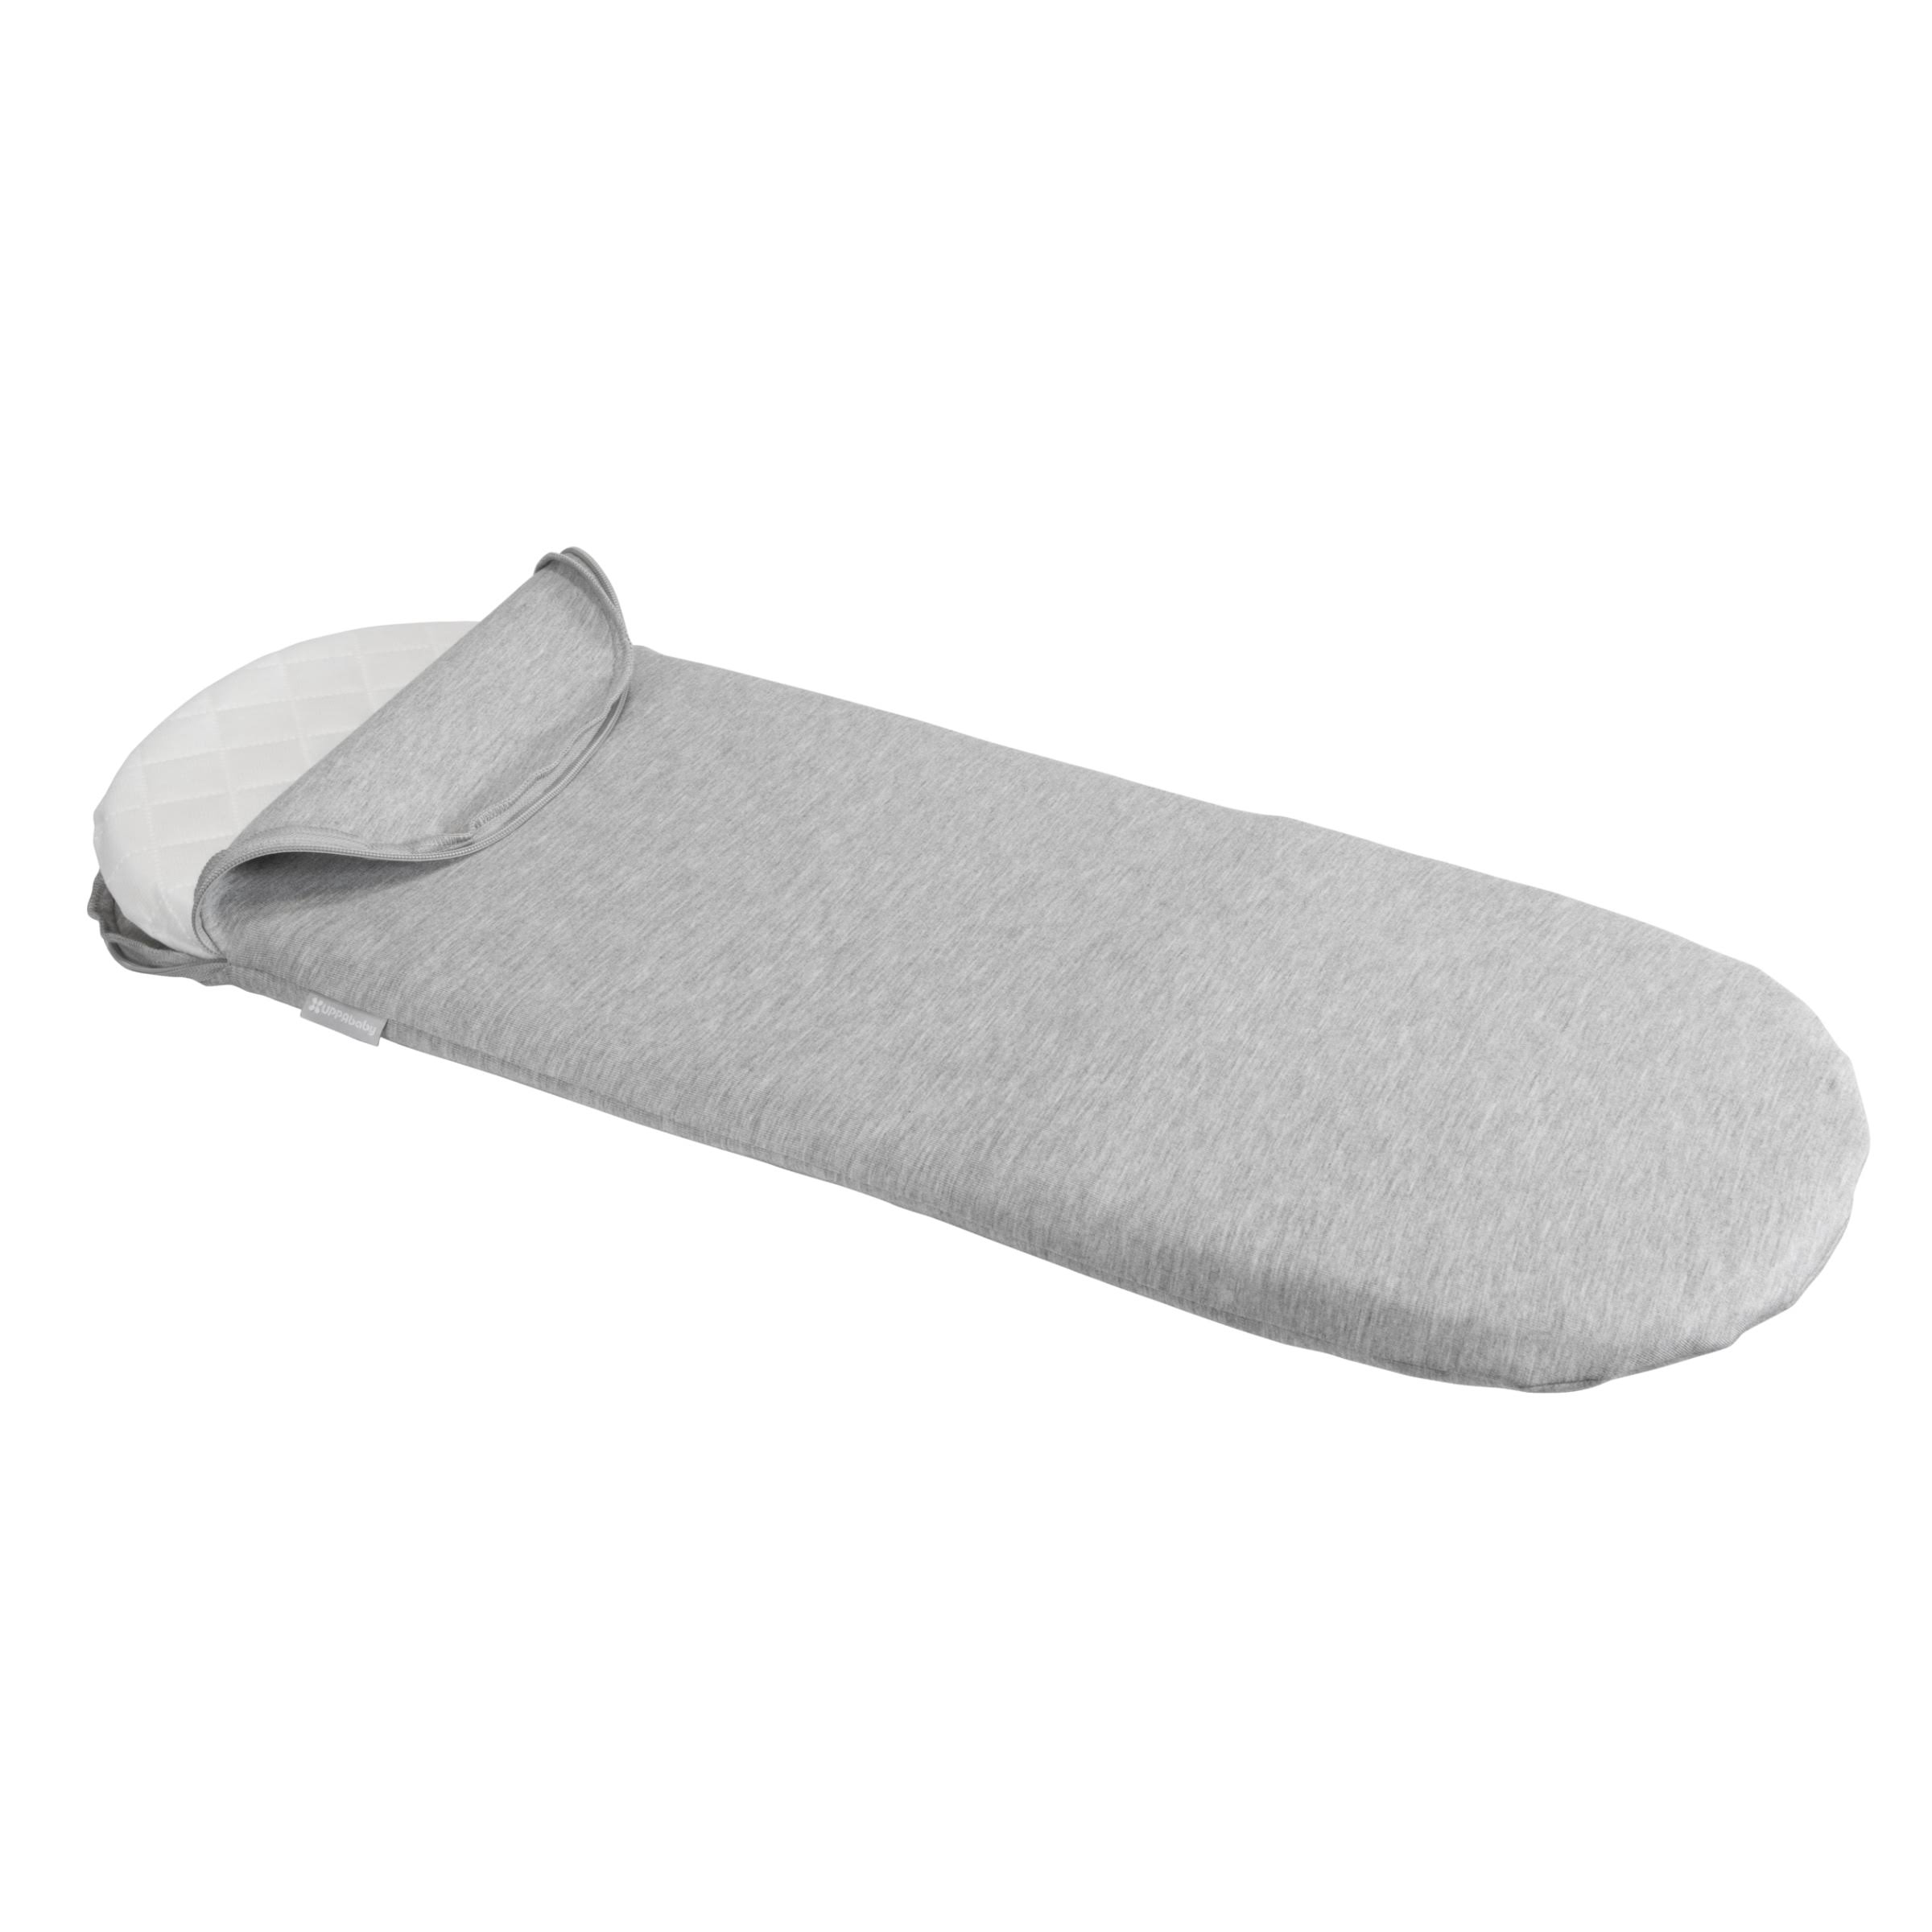 Uppababy Mattress Cover for Bassinet -Light Grey